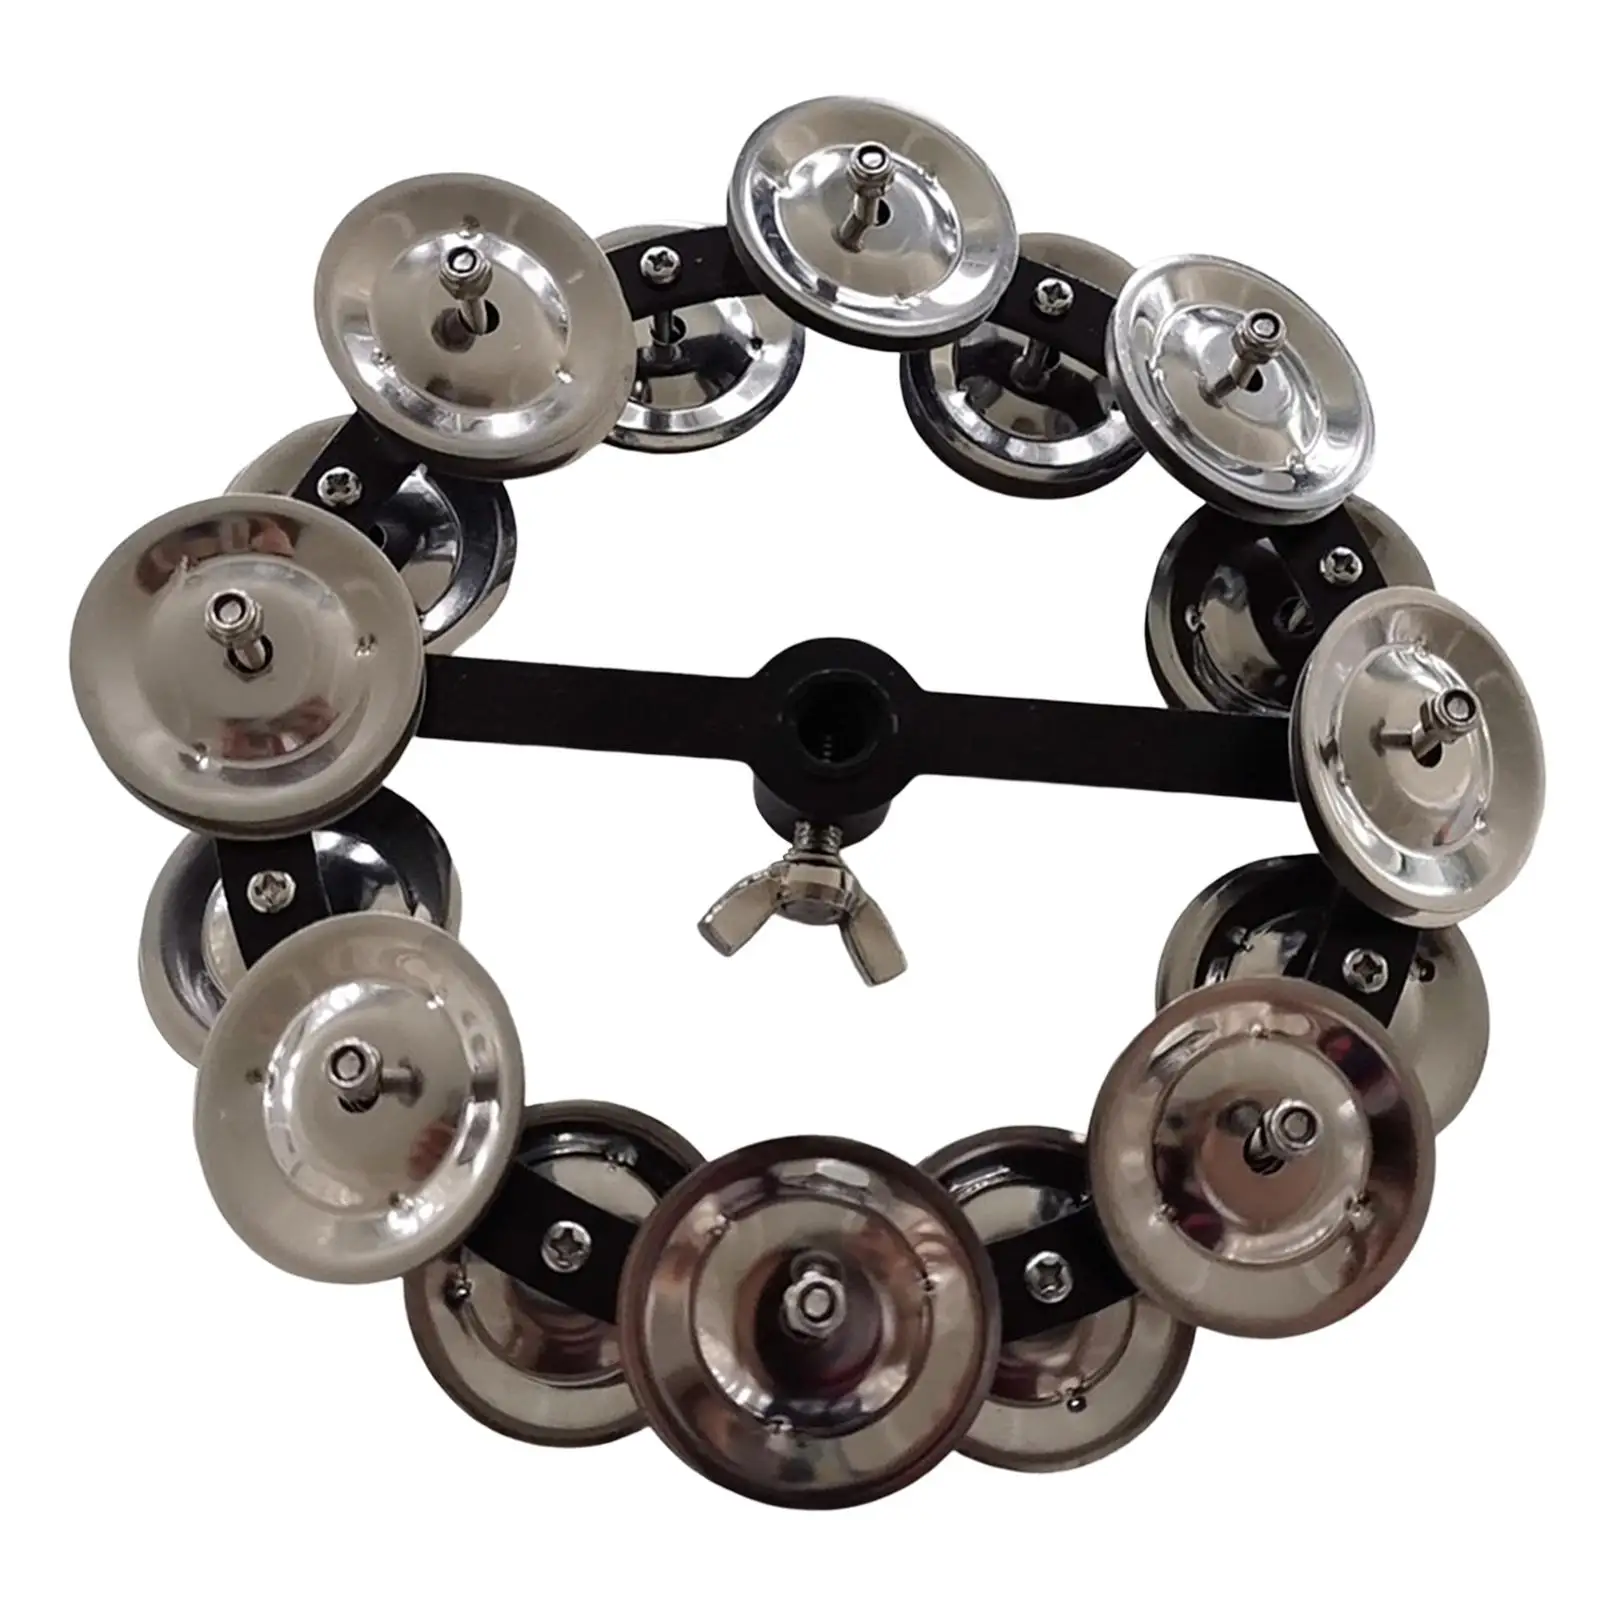 Musical Hi Hat Tambourine Hand Held Percussion Metal Shaker with Double Row Music Rhythm Tambourine for Band Ensemble Parties